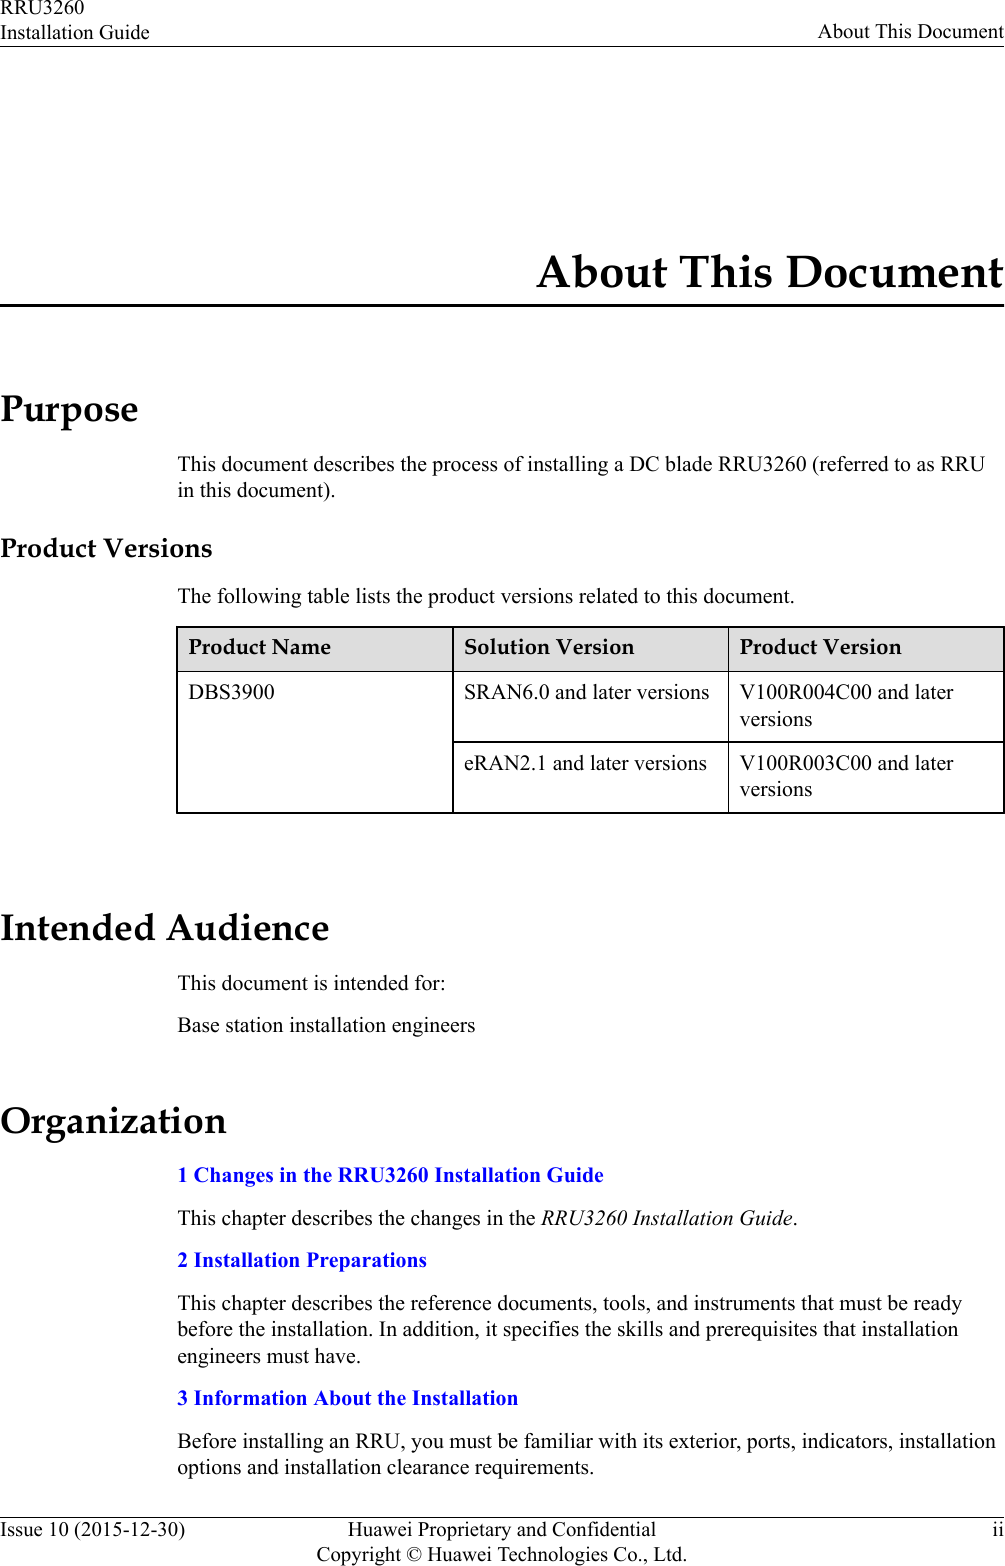 About This DocumentPurposeThis document describes the process of installing a DC blade RRU3260 (referred to as RRUin this document).Product VersionsThe following table lists the product versions related to this document.Product Name Solution Version Product VersionDBS3900 SRAN6.0 and later versions V100R004C00 and laterversionseRAN2.1 and later versions V100R003C00 and laterversions Intended AudienceThis document is intended for:Base station installation engineersOrganization1 Changes in the RRU3260 Installation GuideThis chapter describes the changes in the RRU3260 Installation Guide.2 Installation PreparationsThis chapter describes the reference documents, tools, and instruments that must be readybefore the installation. In addition, it specifies the skills and prerequisites that installationengineers must have.3 Information About the InstallationBefore installing an RRU, you must be familiar with its exterior, ports, indicators, installationoptions and installation clearance requirements.RRU3260Installation Guide About This DocumentIssue 10 (2015-12-30) Huawei Proprietary and ConfidentialCopyright © Huawei Technologies Co., Ltd.ii